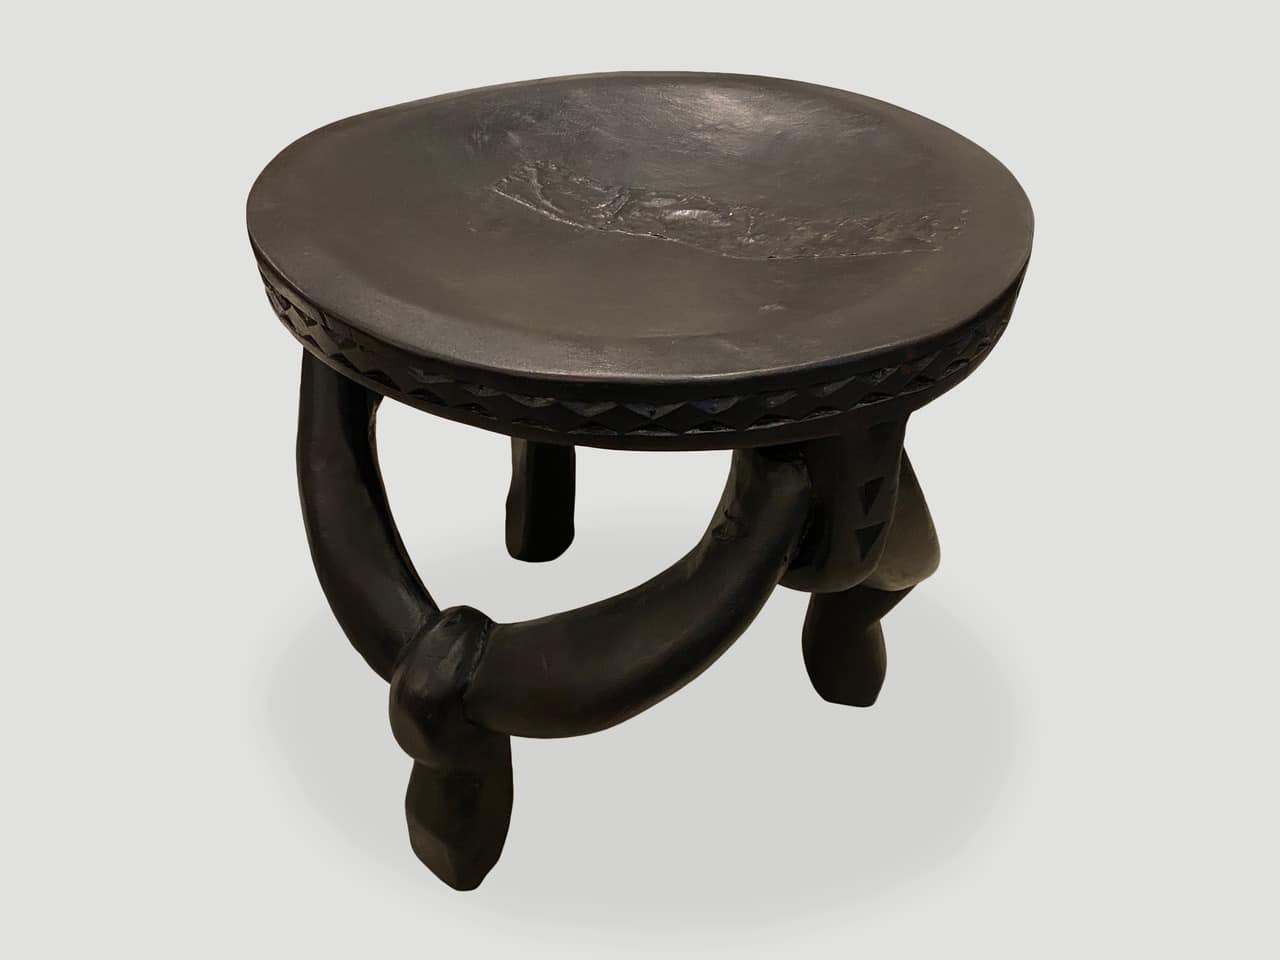 TANZANIAN ANTIQUE SCULPTURAL SIDE TABLE OR STOOL.